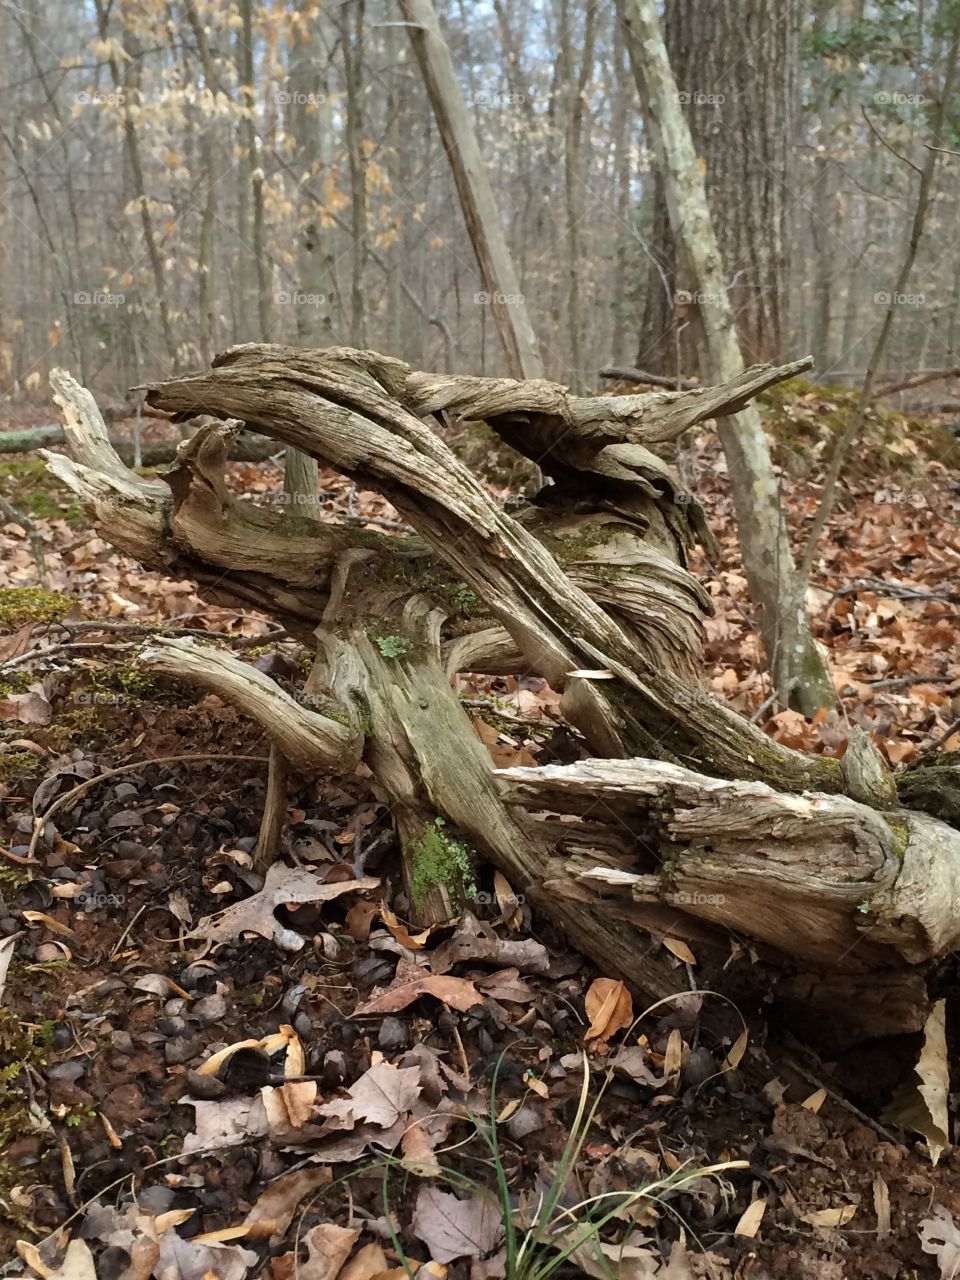 A natural, drastically warped wood growth on the forest floor of an old Virginia property